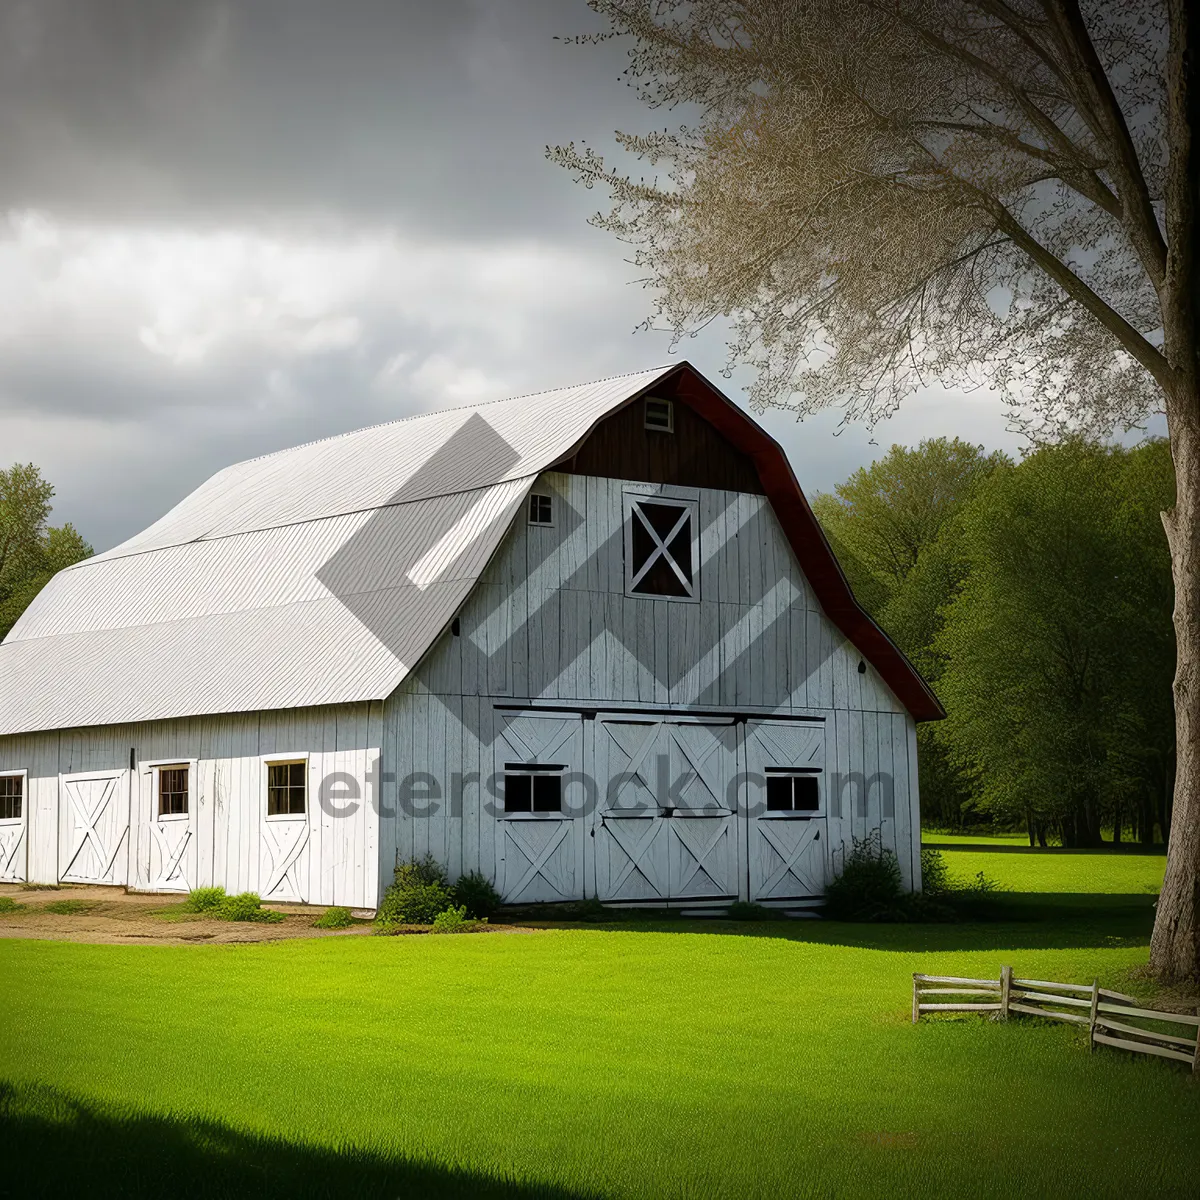 Picture of Rustic country barn nestled in the grassy countryside